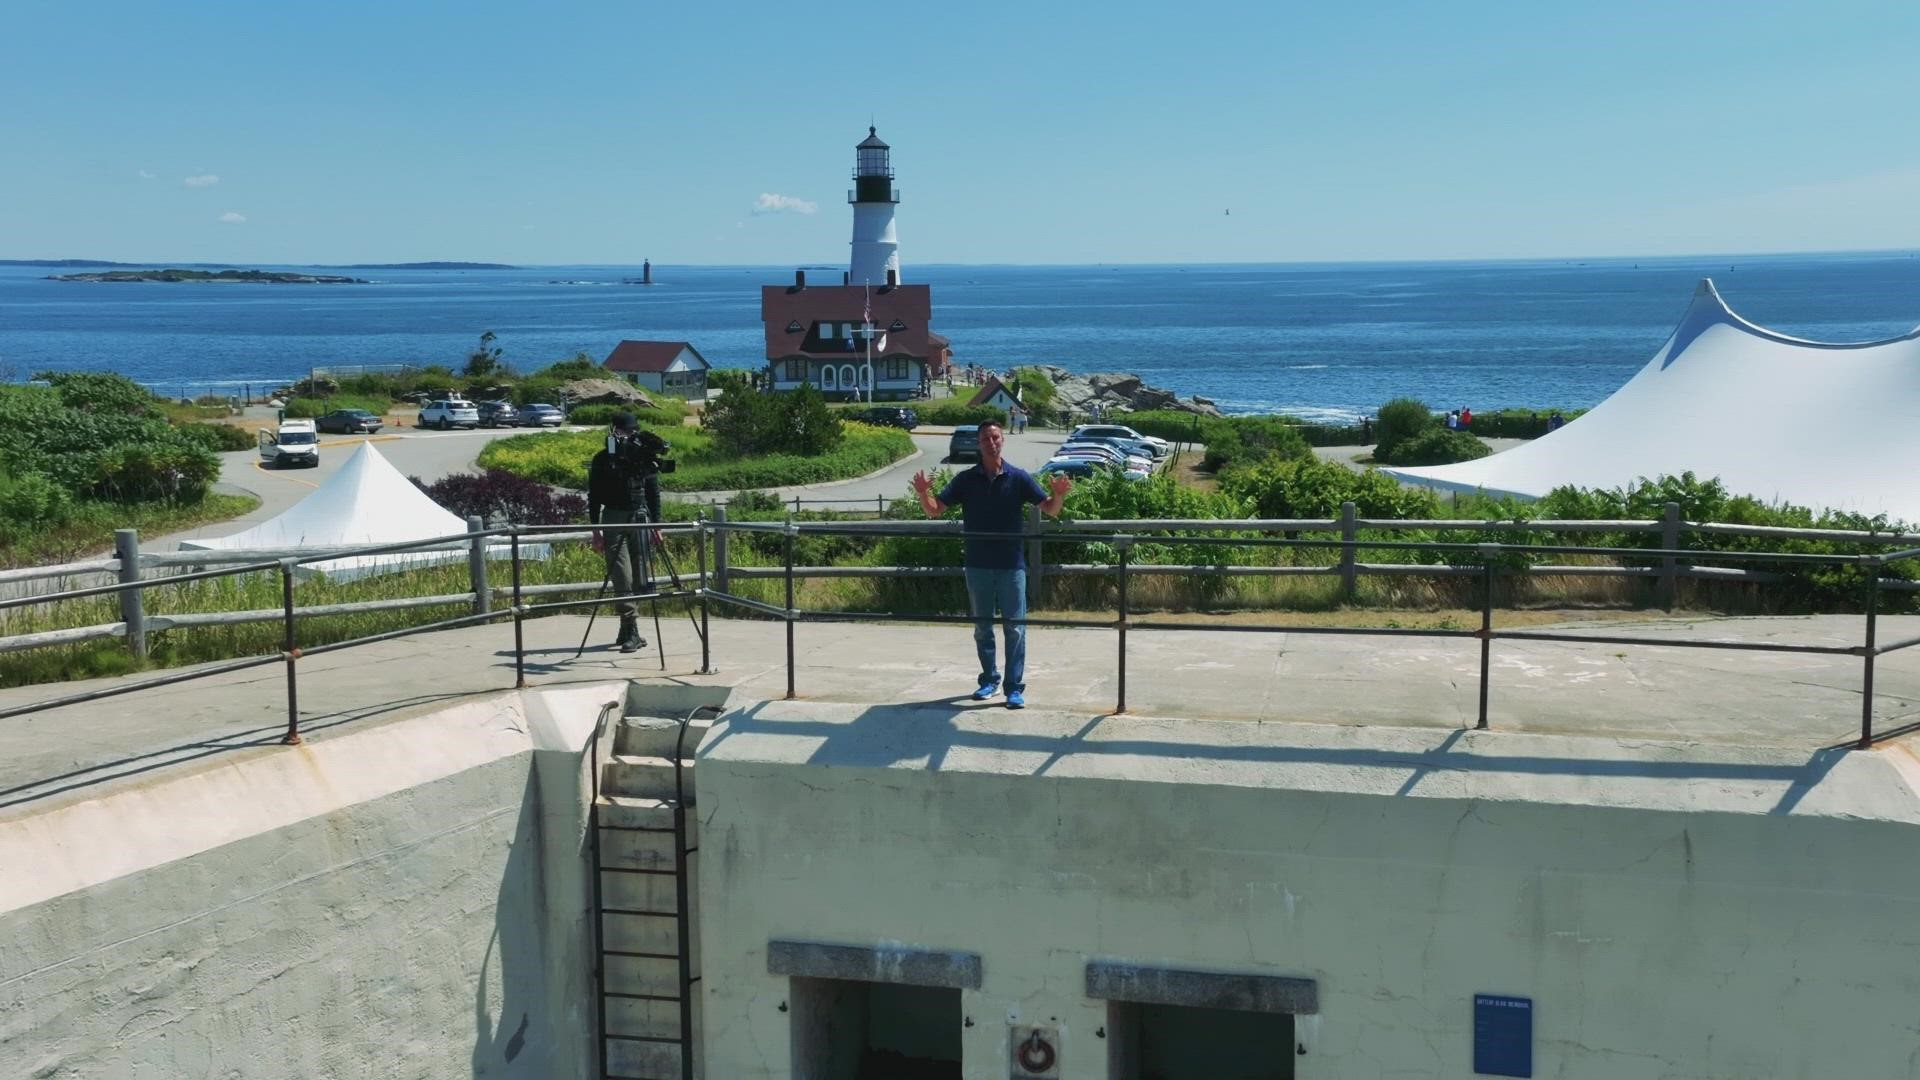 Not only is Fort Williams home to one of the most photographed lighthouses in the world, but it's also where you can explore a beautiful children's garden.